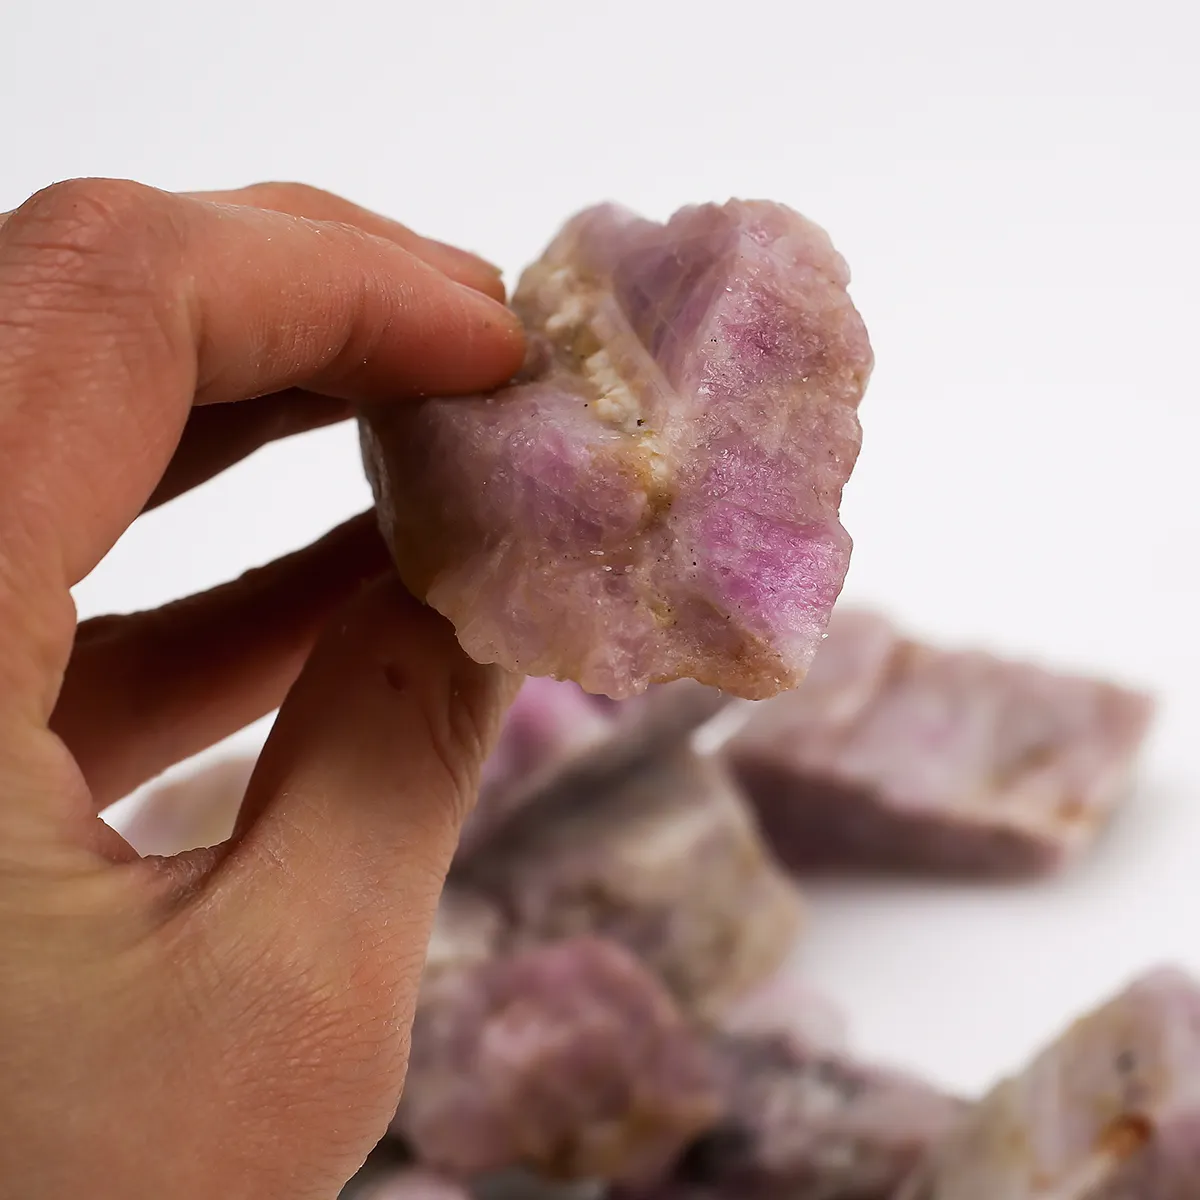 Natural Raw Kunzite Tumbled Stone Crystal Mineral Specimens Rough Crystals Healing Stone